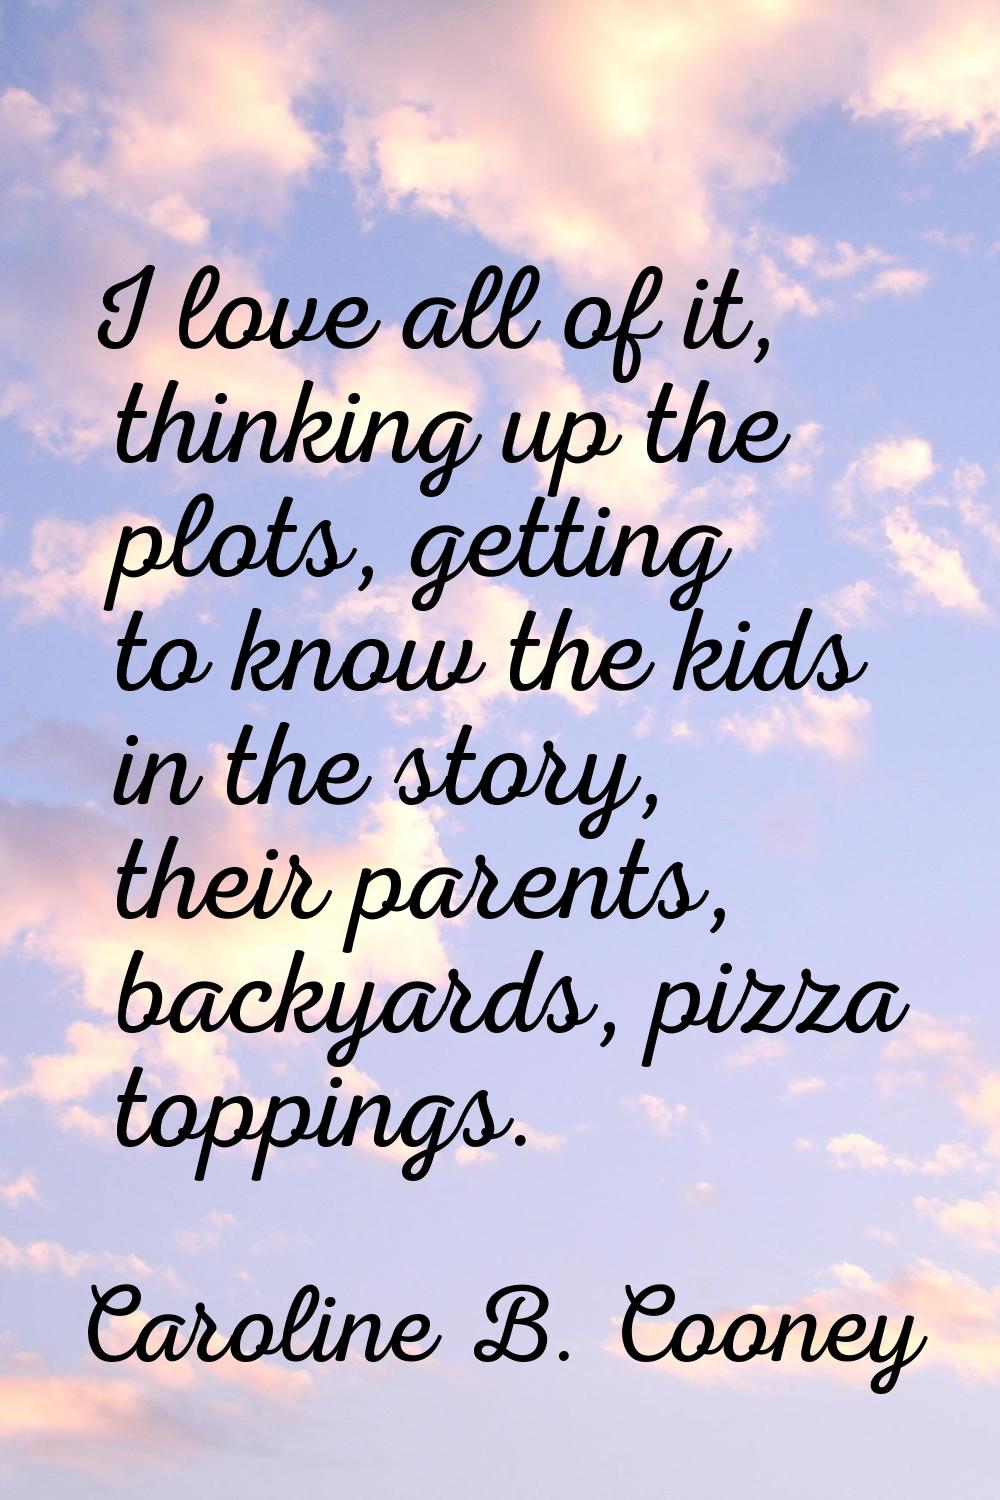 I love all of it, thinking up the plots, getting to know the kids in the story, their parents, back